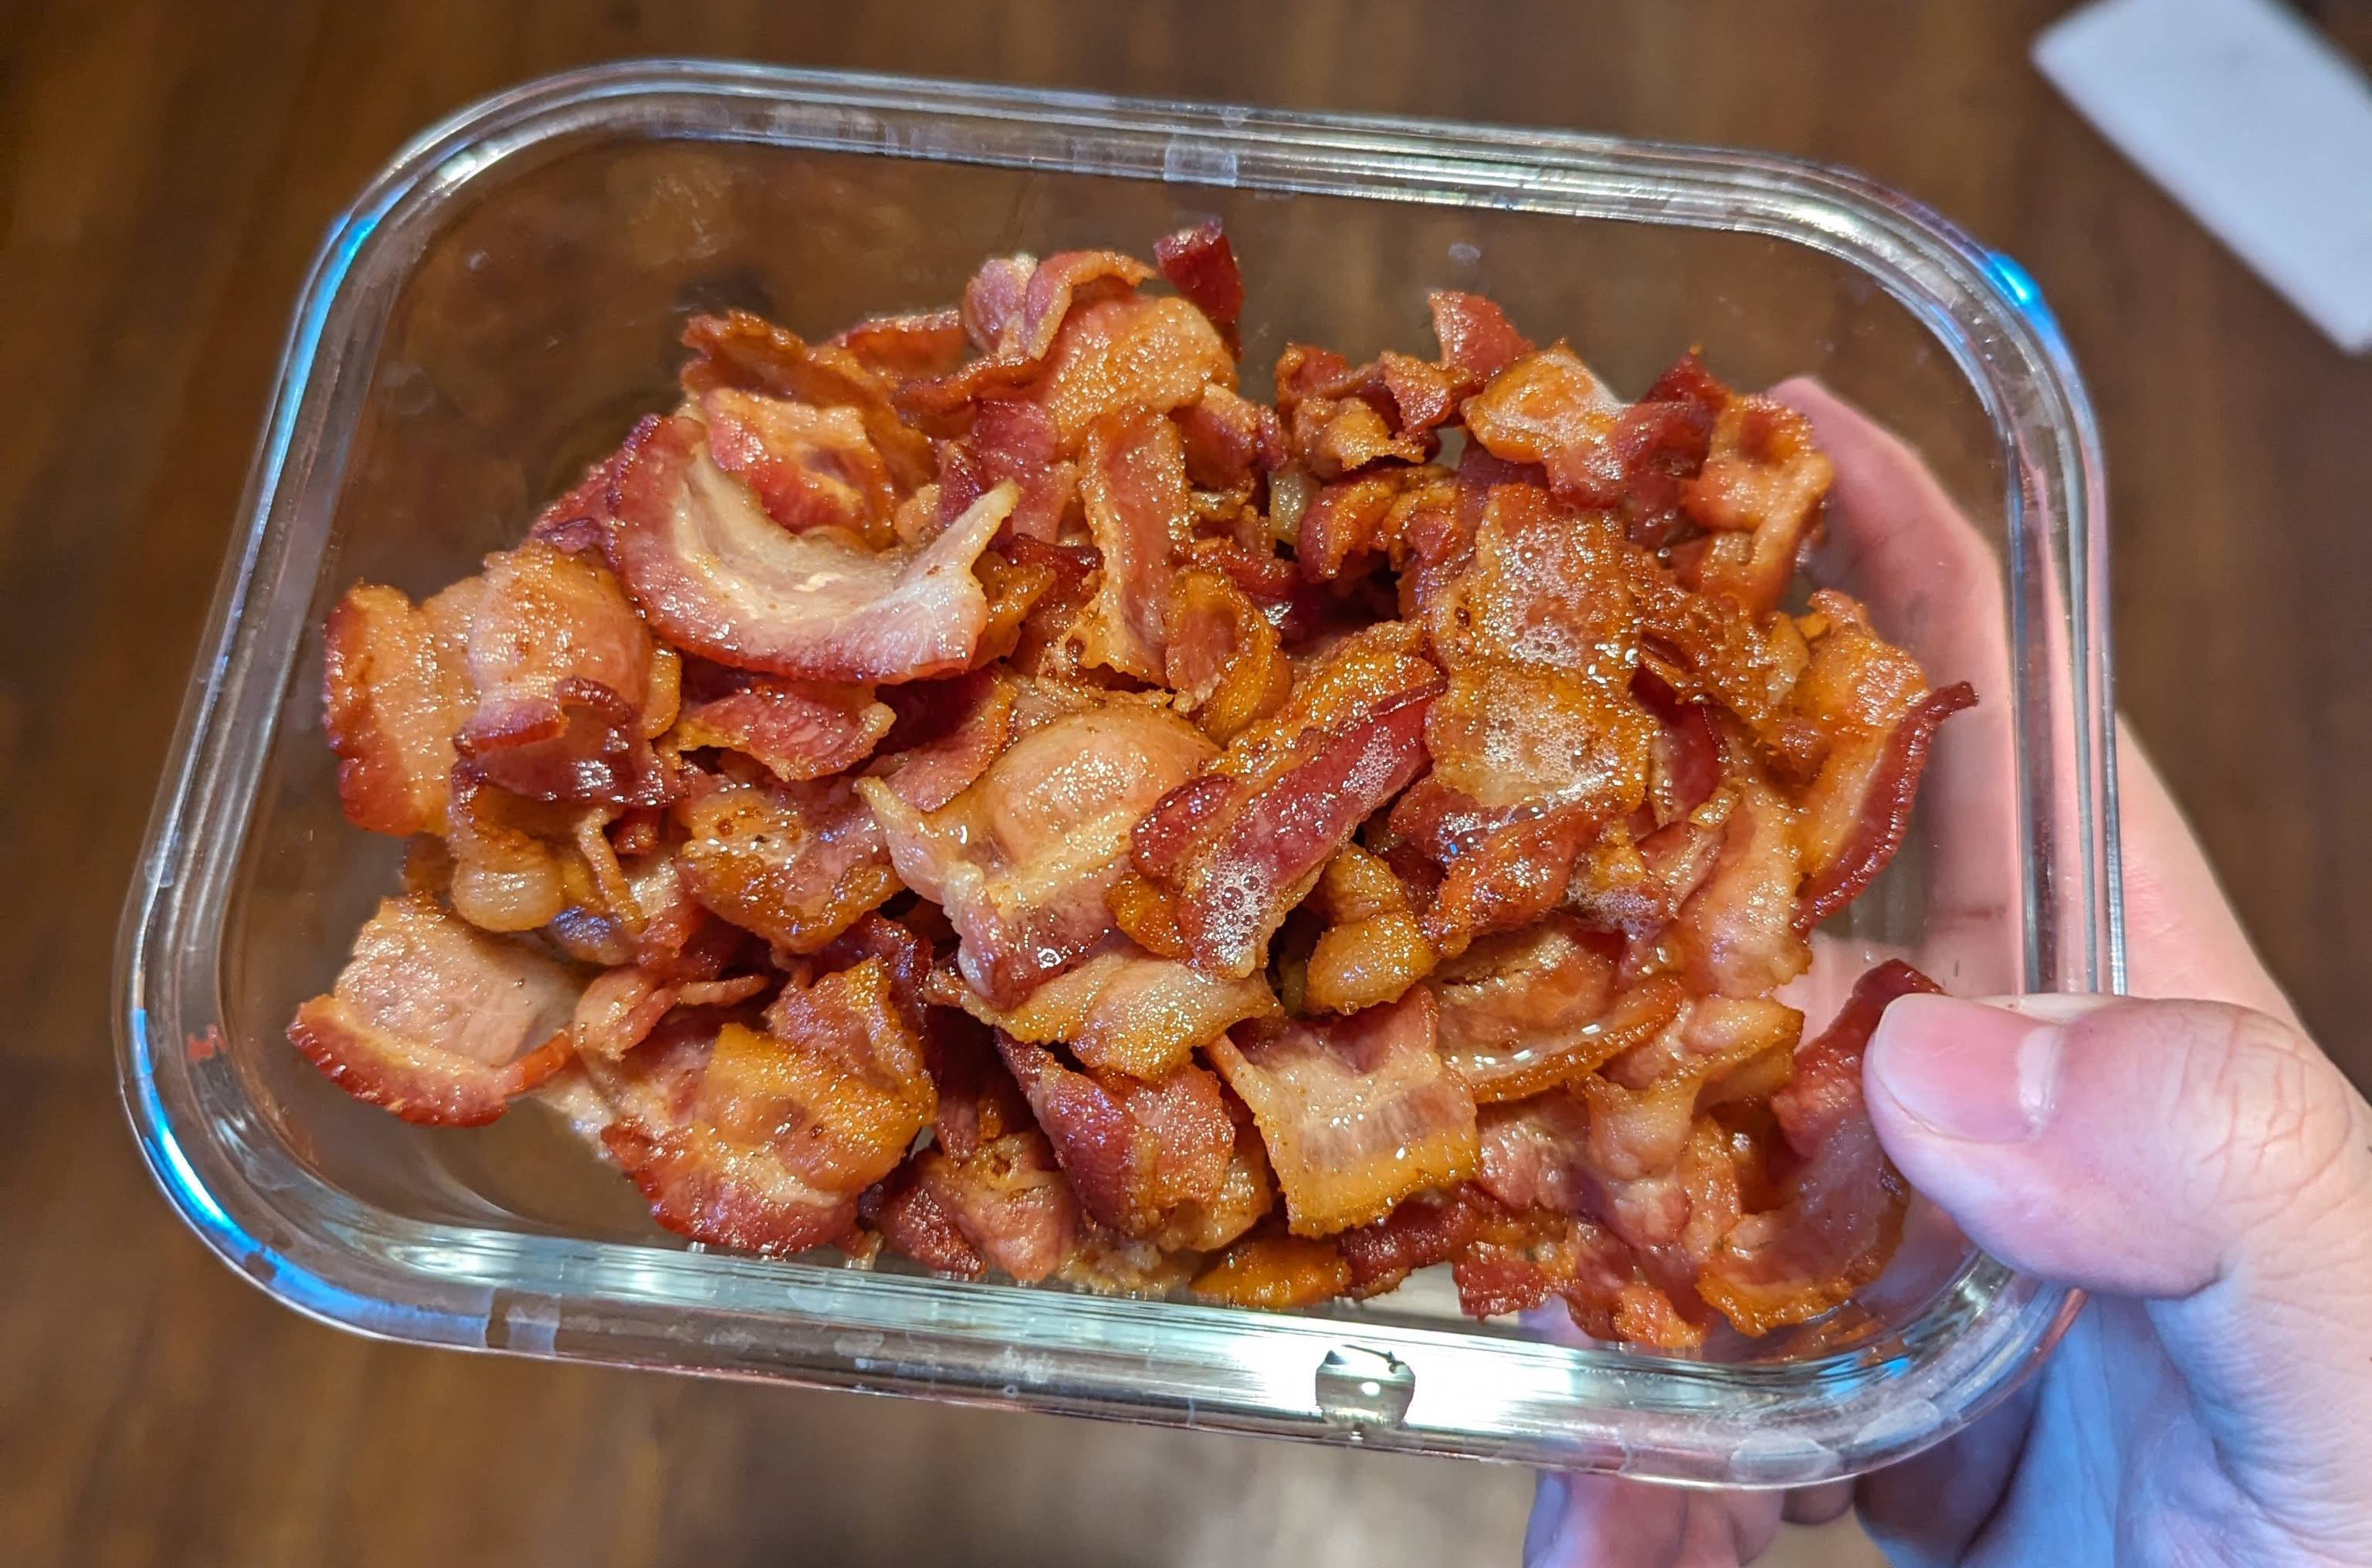 A container with one pound of cooked bacon.